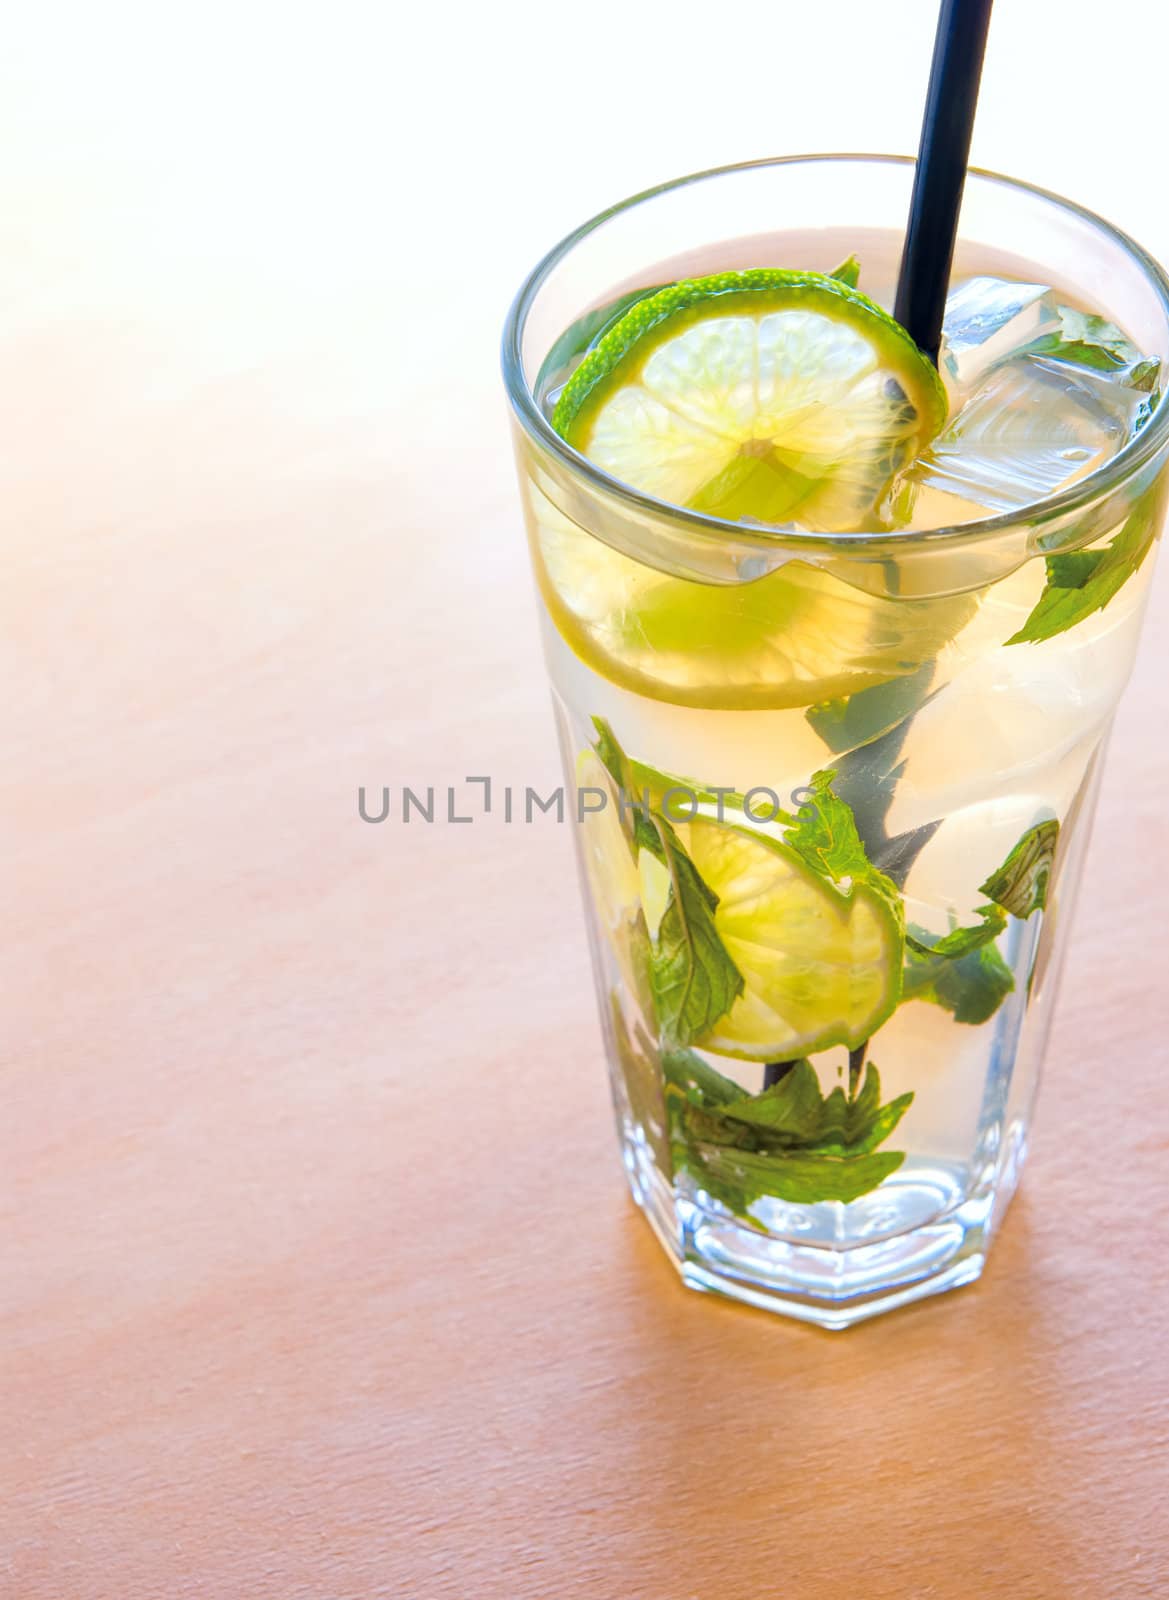 mojito cocktails with lime, mint leaves and ice on wooden placemat background